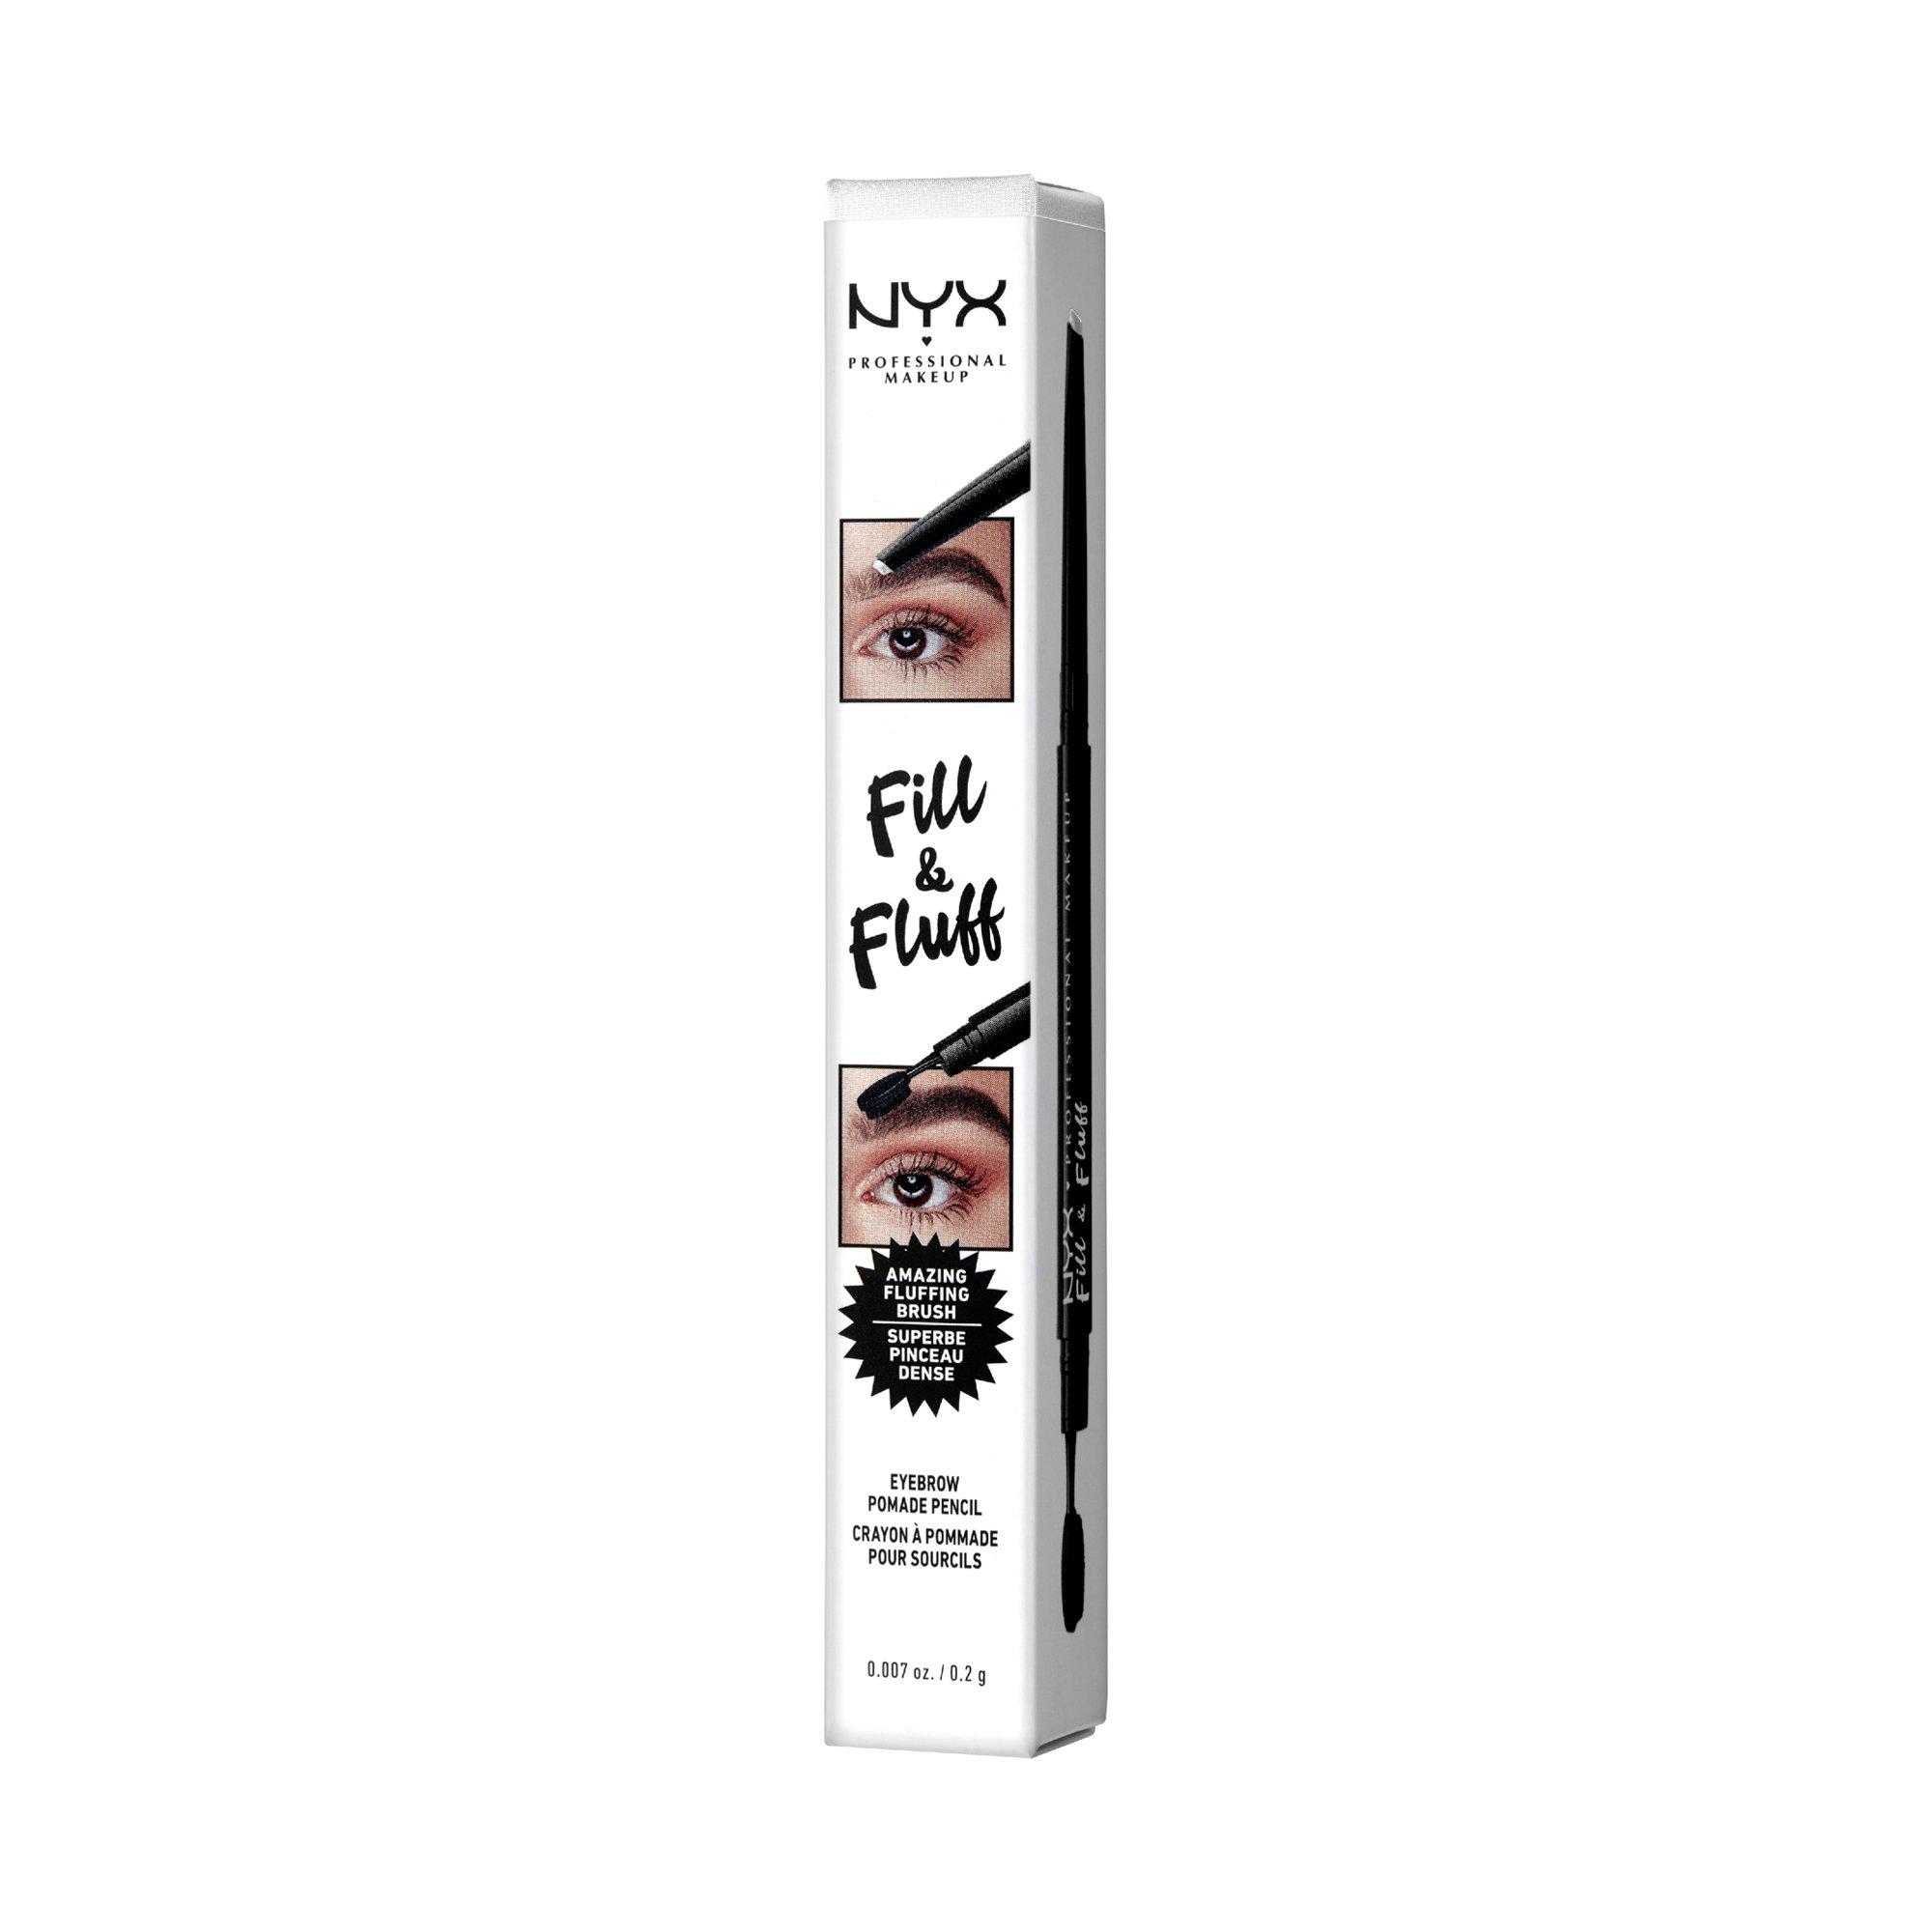 Image of NYX-PROFESSIONAL-MAKEUP Augenbrauen - Fill & Fluff Eyebrow Pomade Pencil